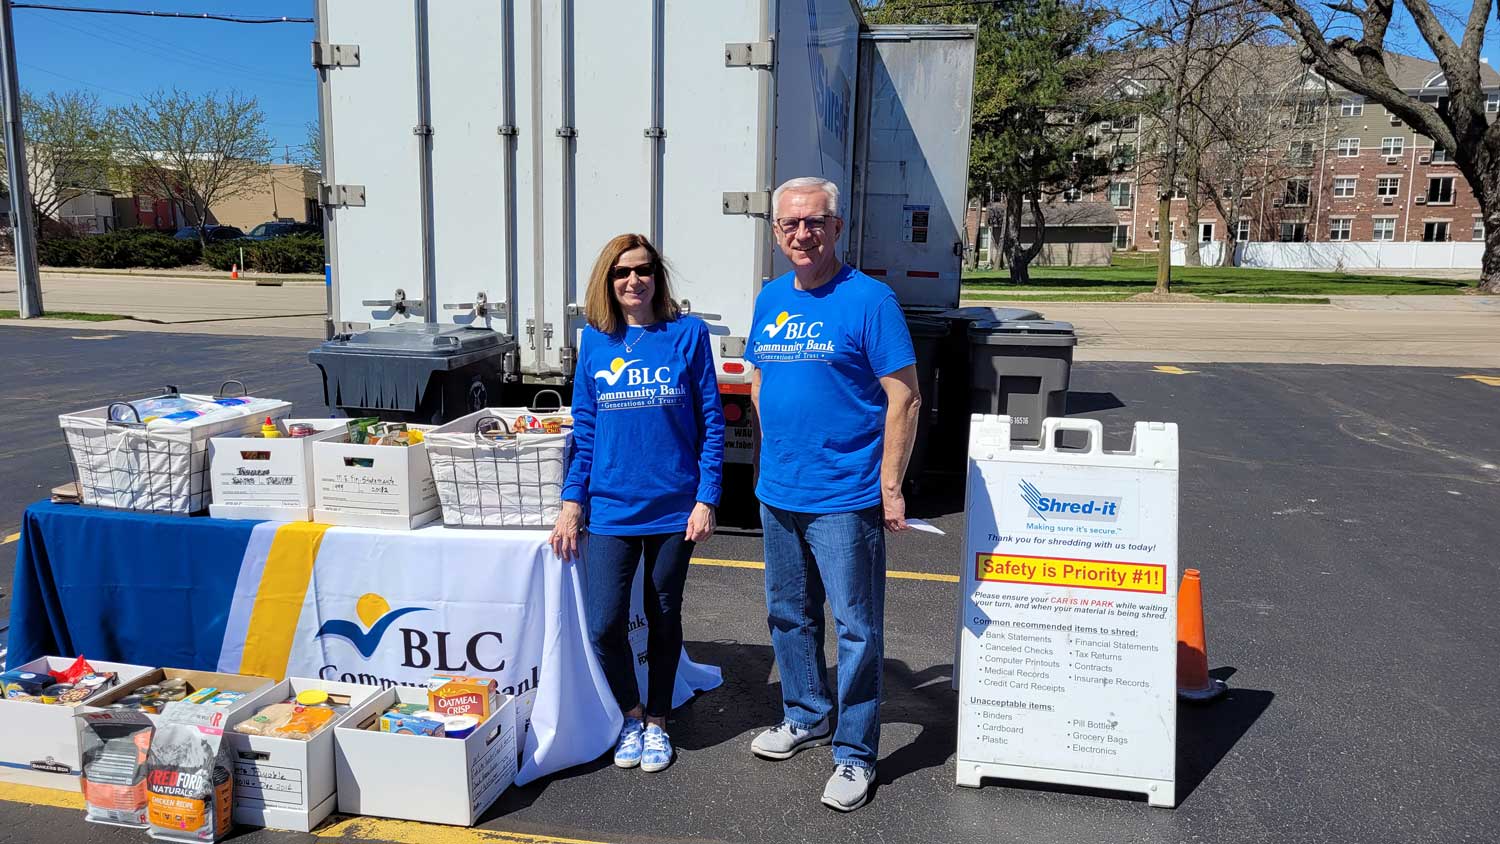 BLC employees Terri and Dave pose for a picture while helping out at our annual Shredfest event.